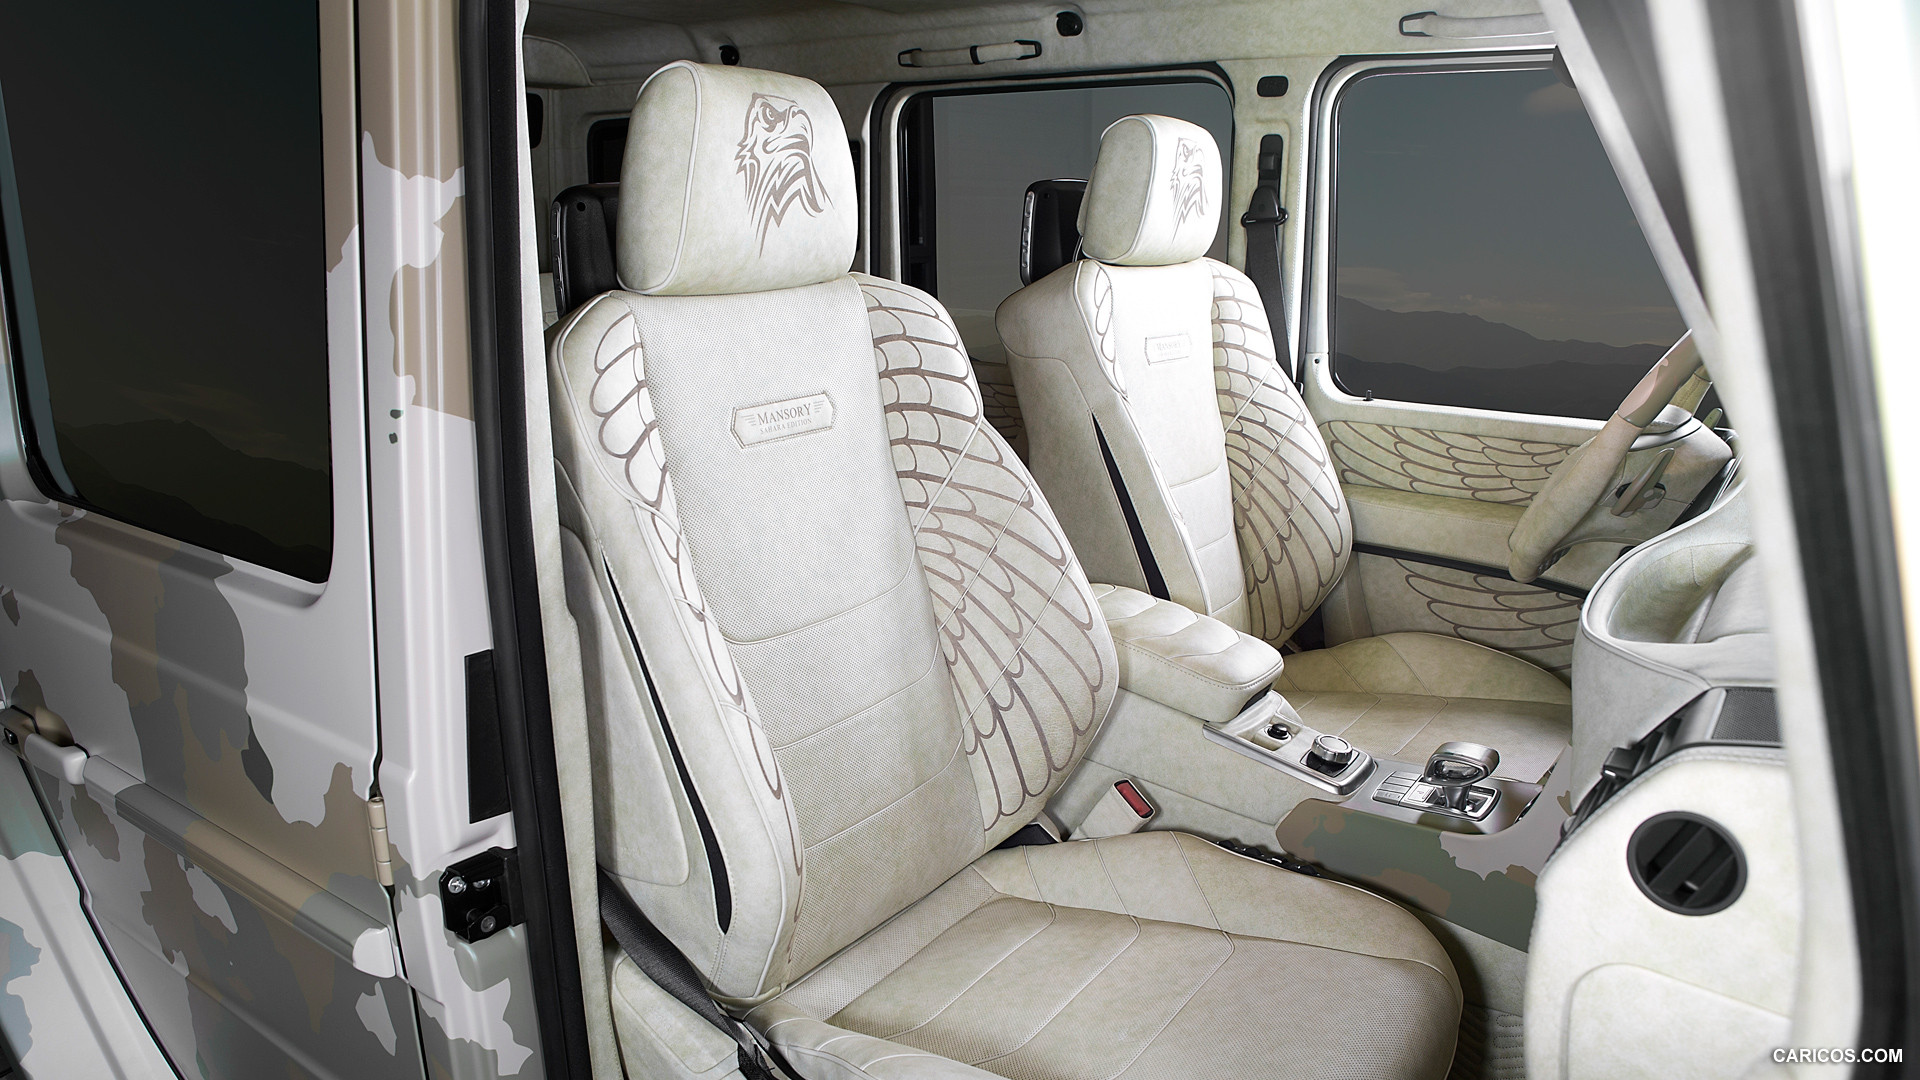 2015 Mansory Mercedes-Benz G63 AMG Sahara Edition  - Interior Front Seats, #8 of 9